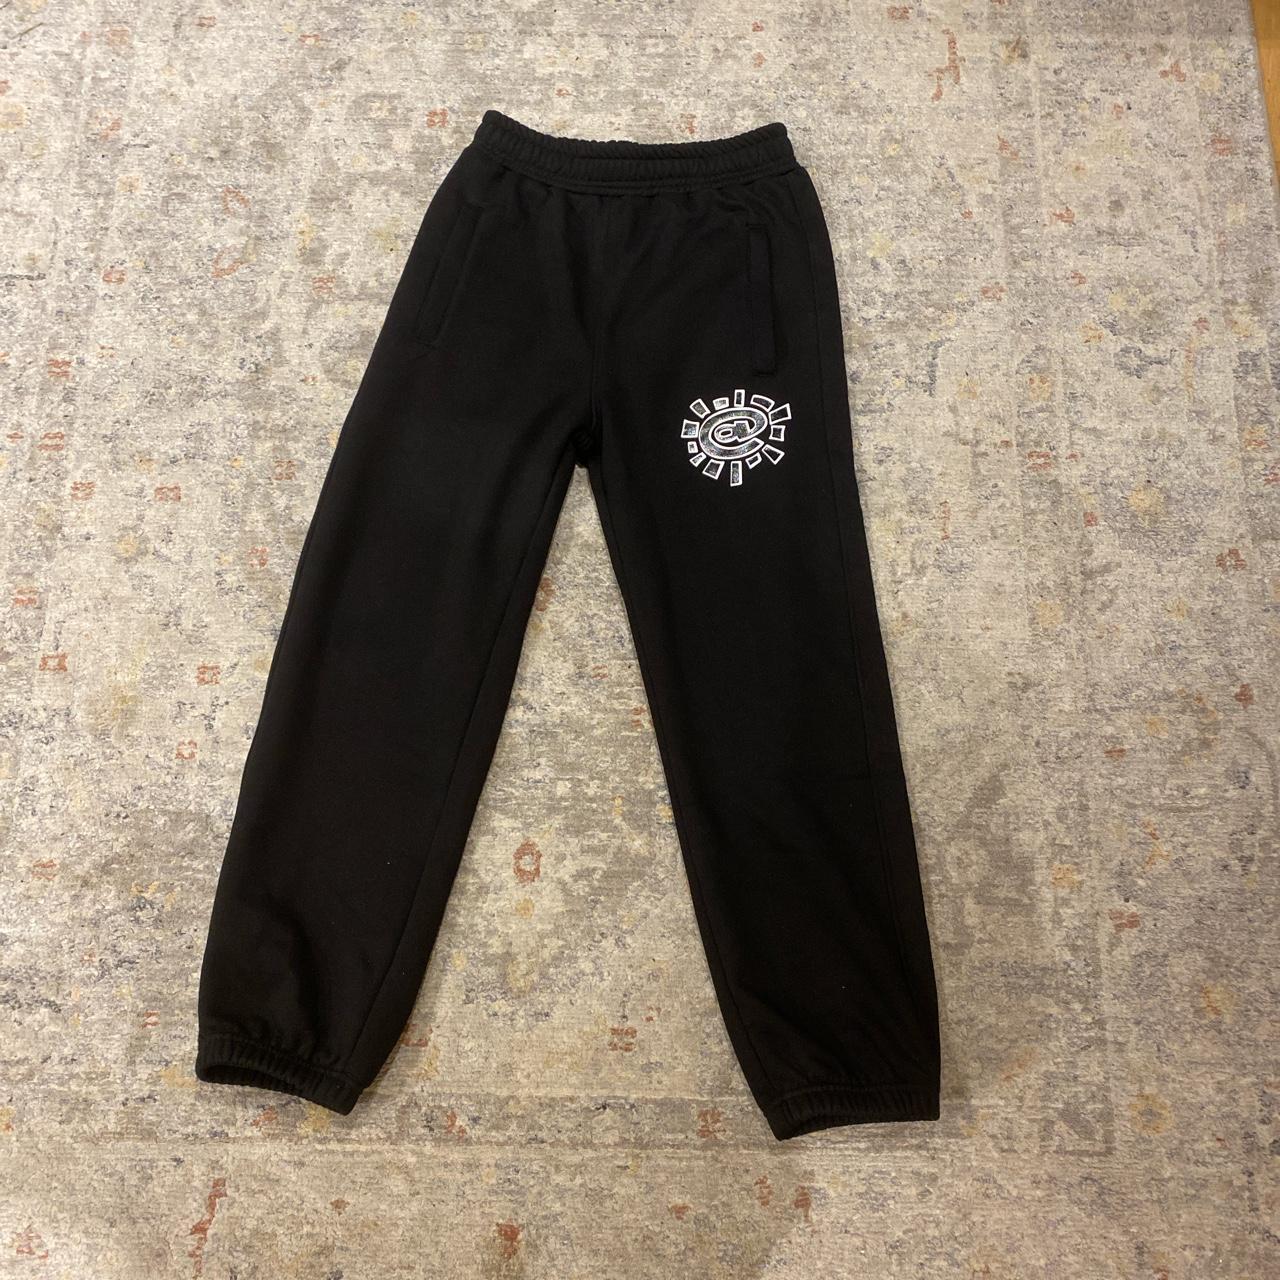 always do what you should do joggers black size... - Depop